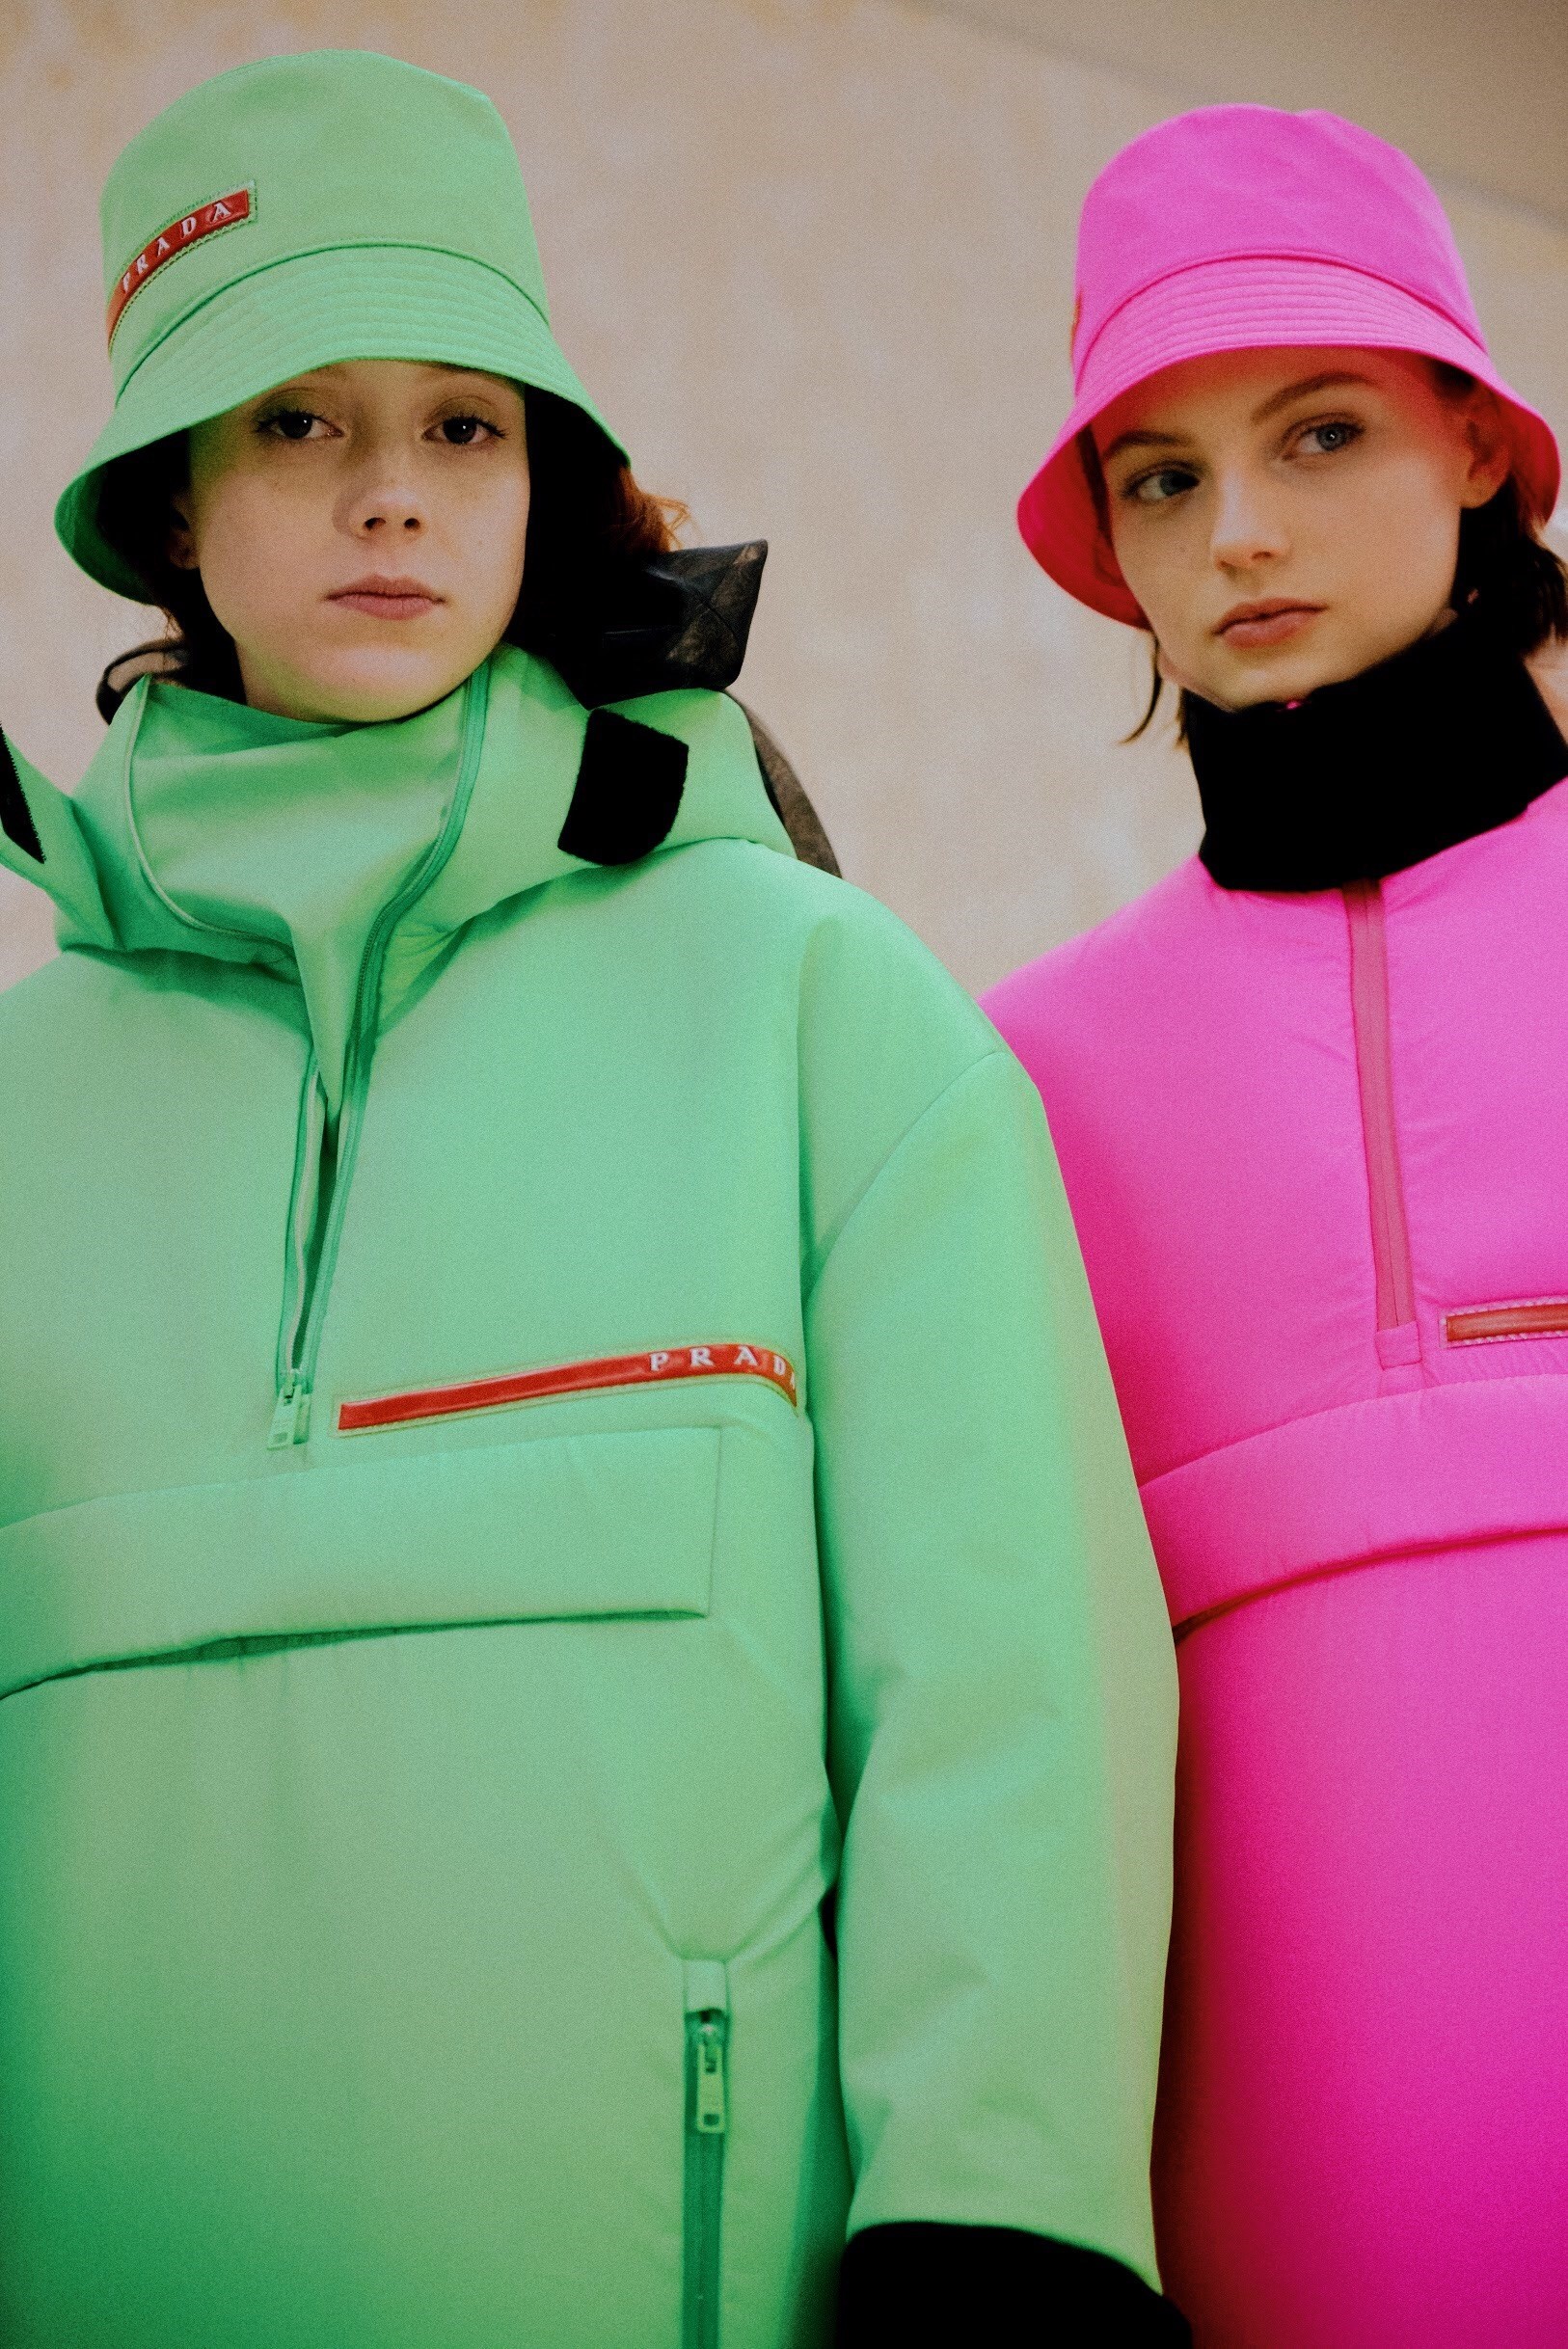 Prada does neon, nylon, and brings back some favourite models Womenswear |  Dazed